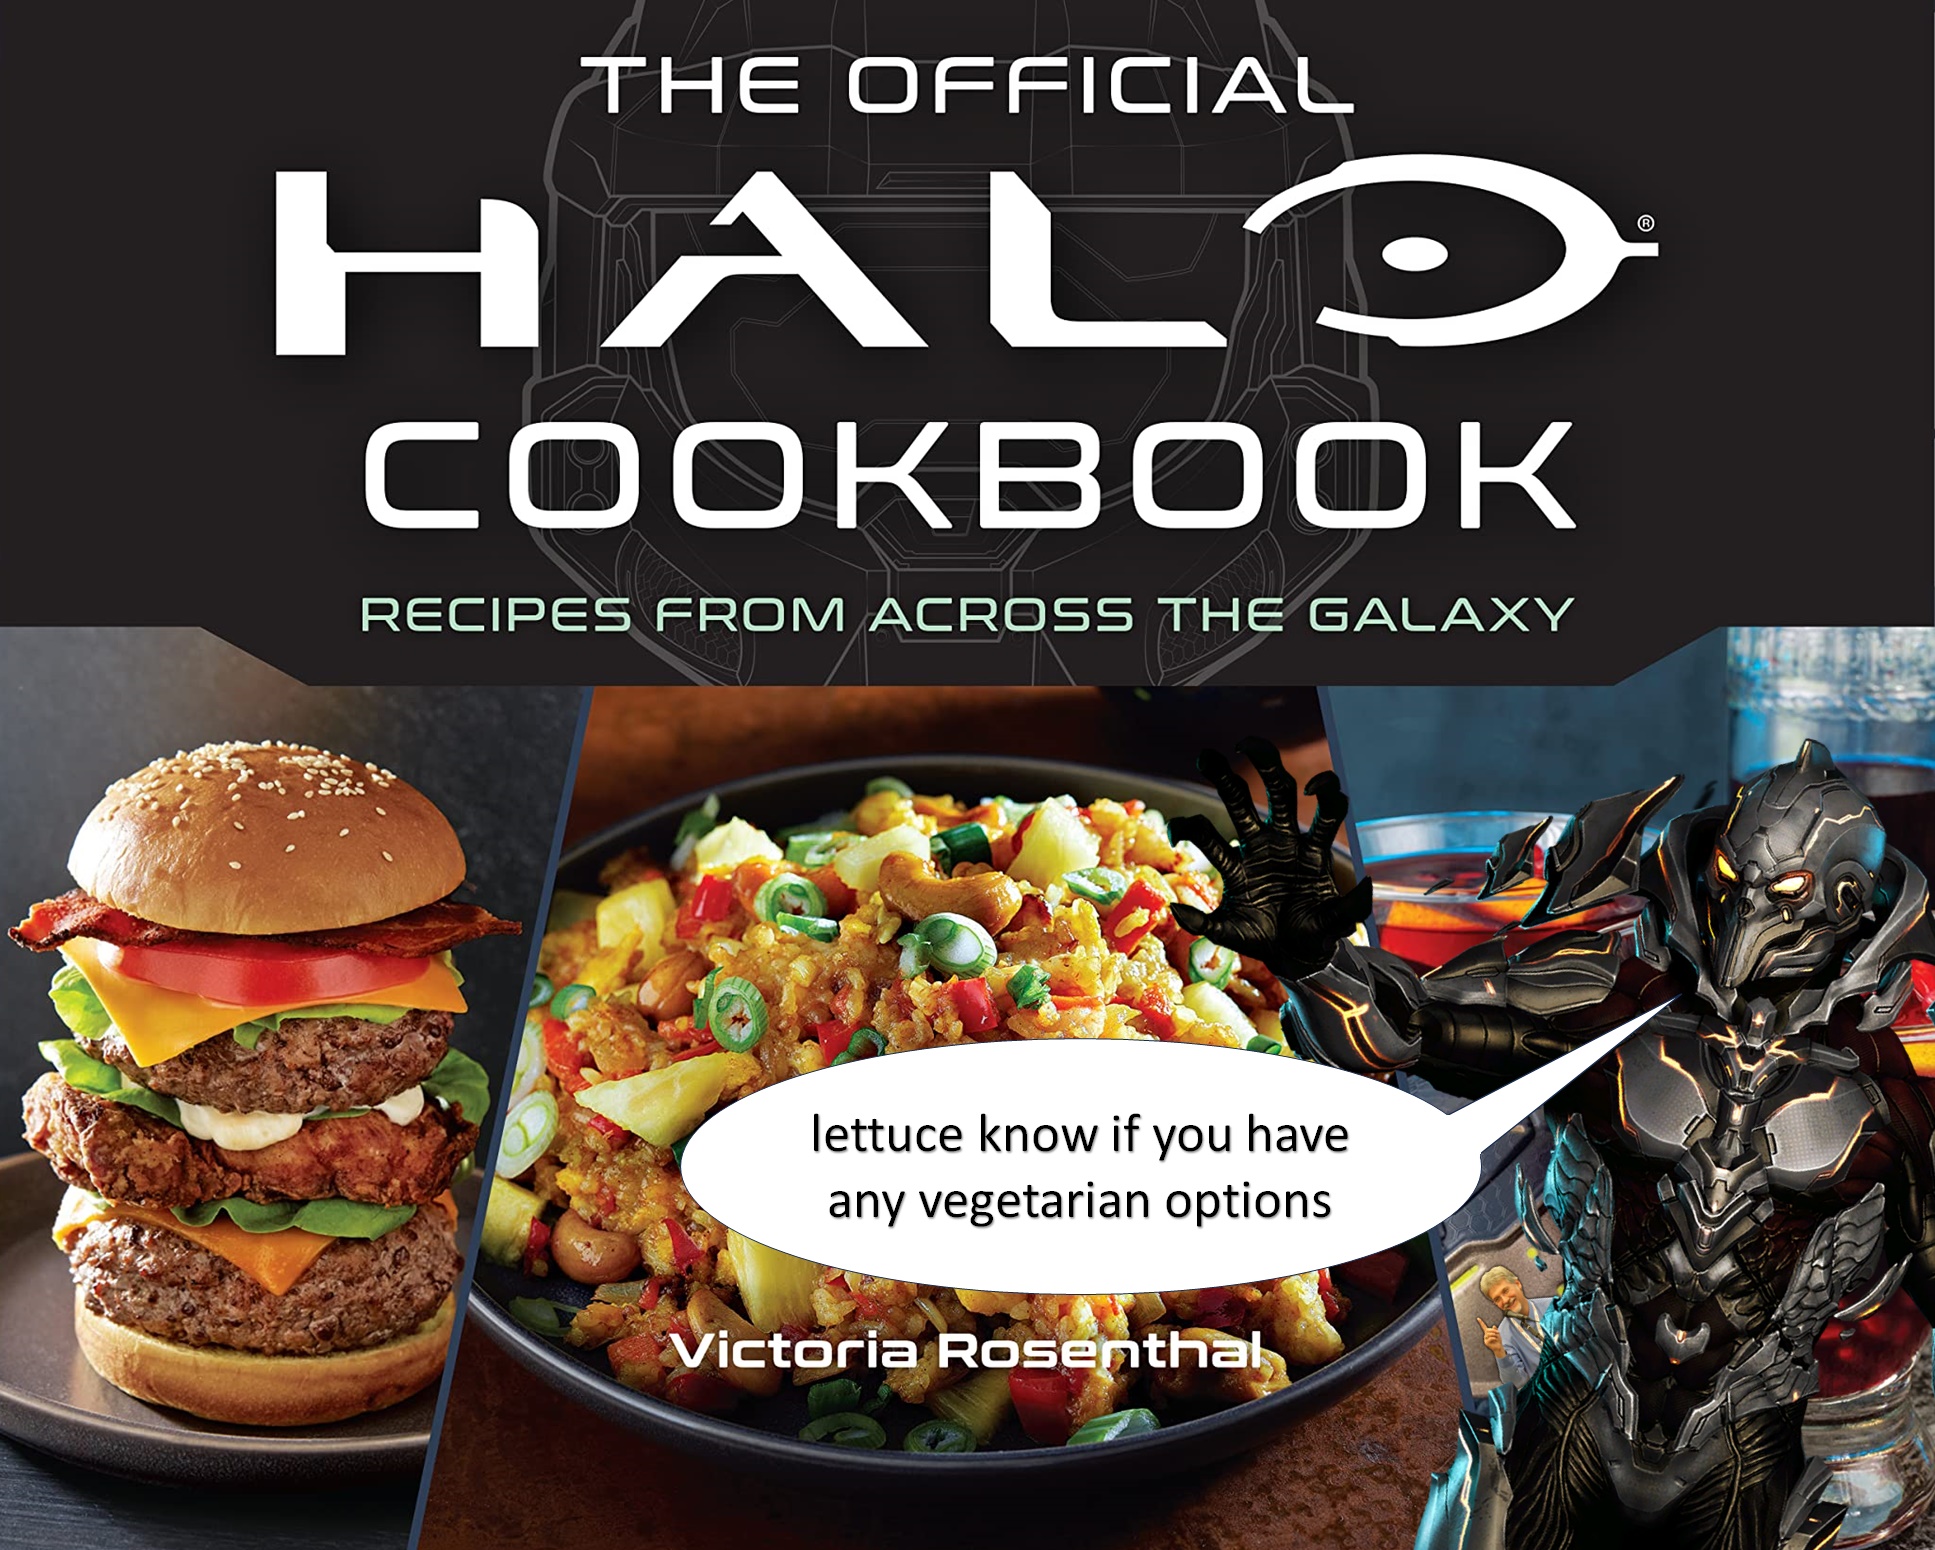 Cover art crop of The Official Halo Cookbook featuring the Didact saying "lettuce know if you have any vegetarian options"